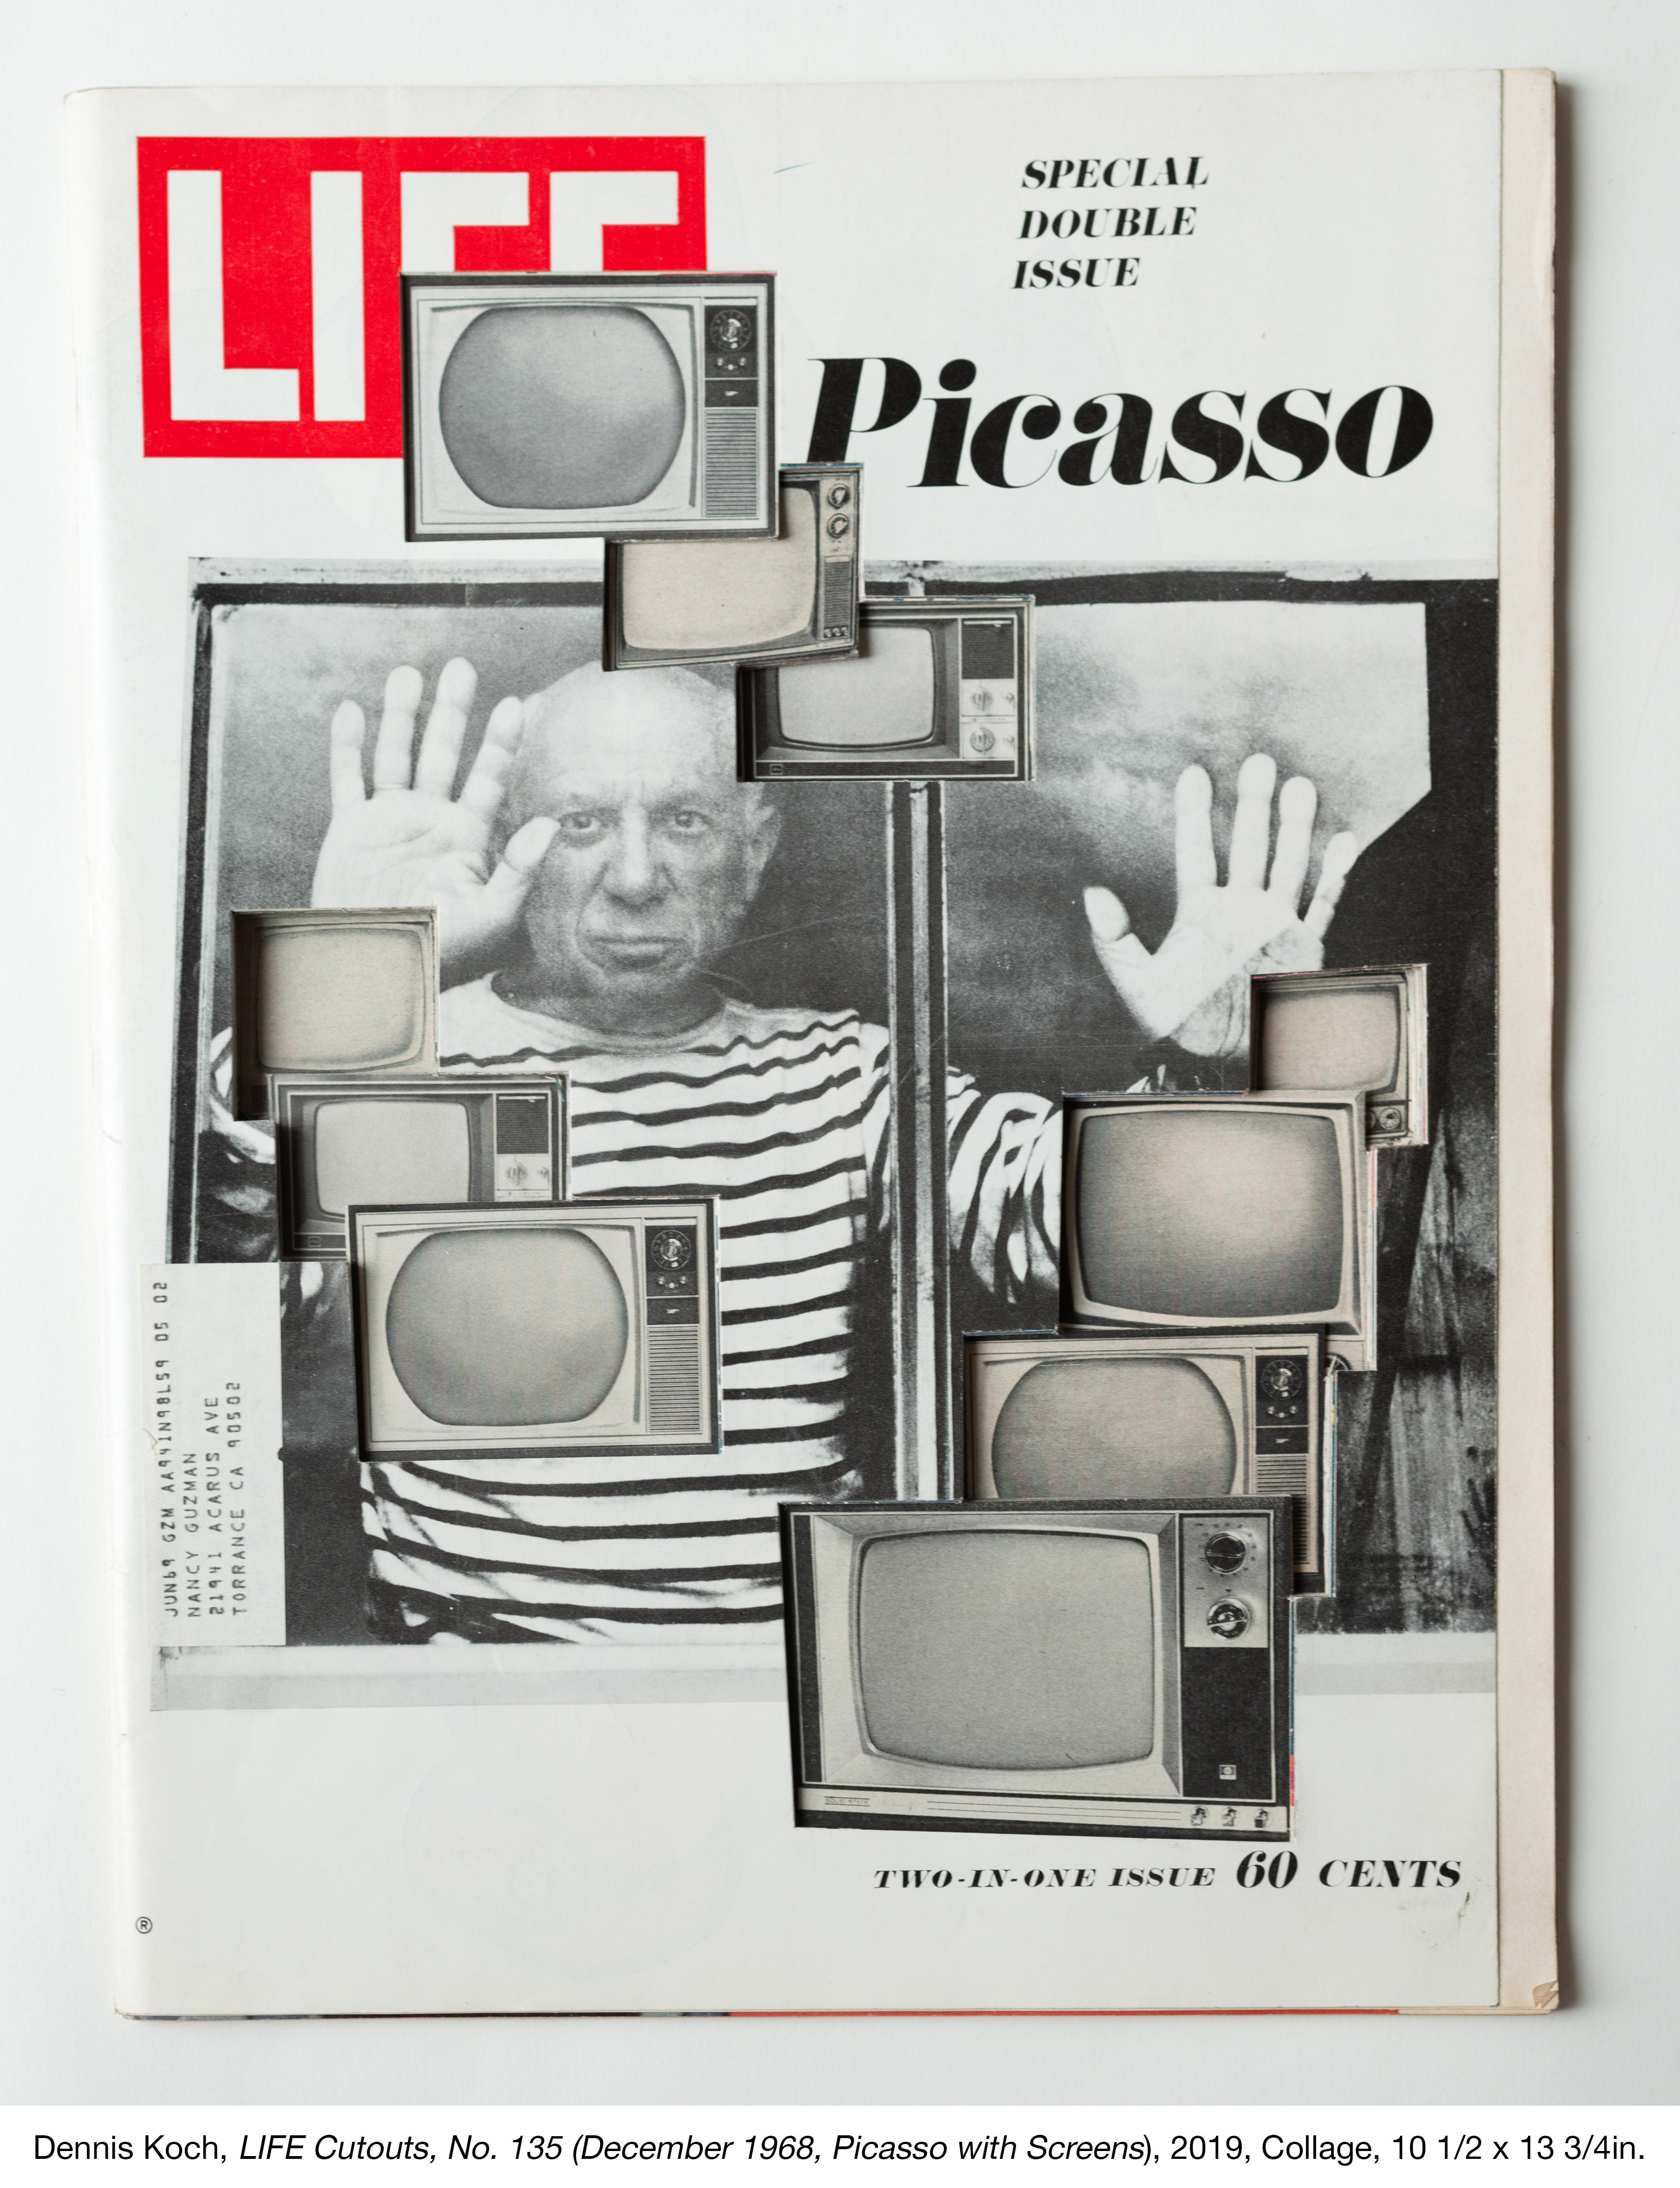 LIFE Cutouts No. 135 (December 1968, Picasso with TV screens) - Art by Dennis Koch